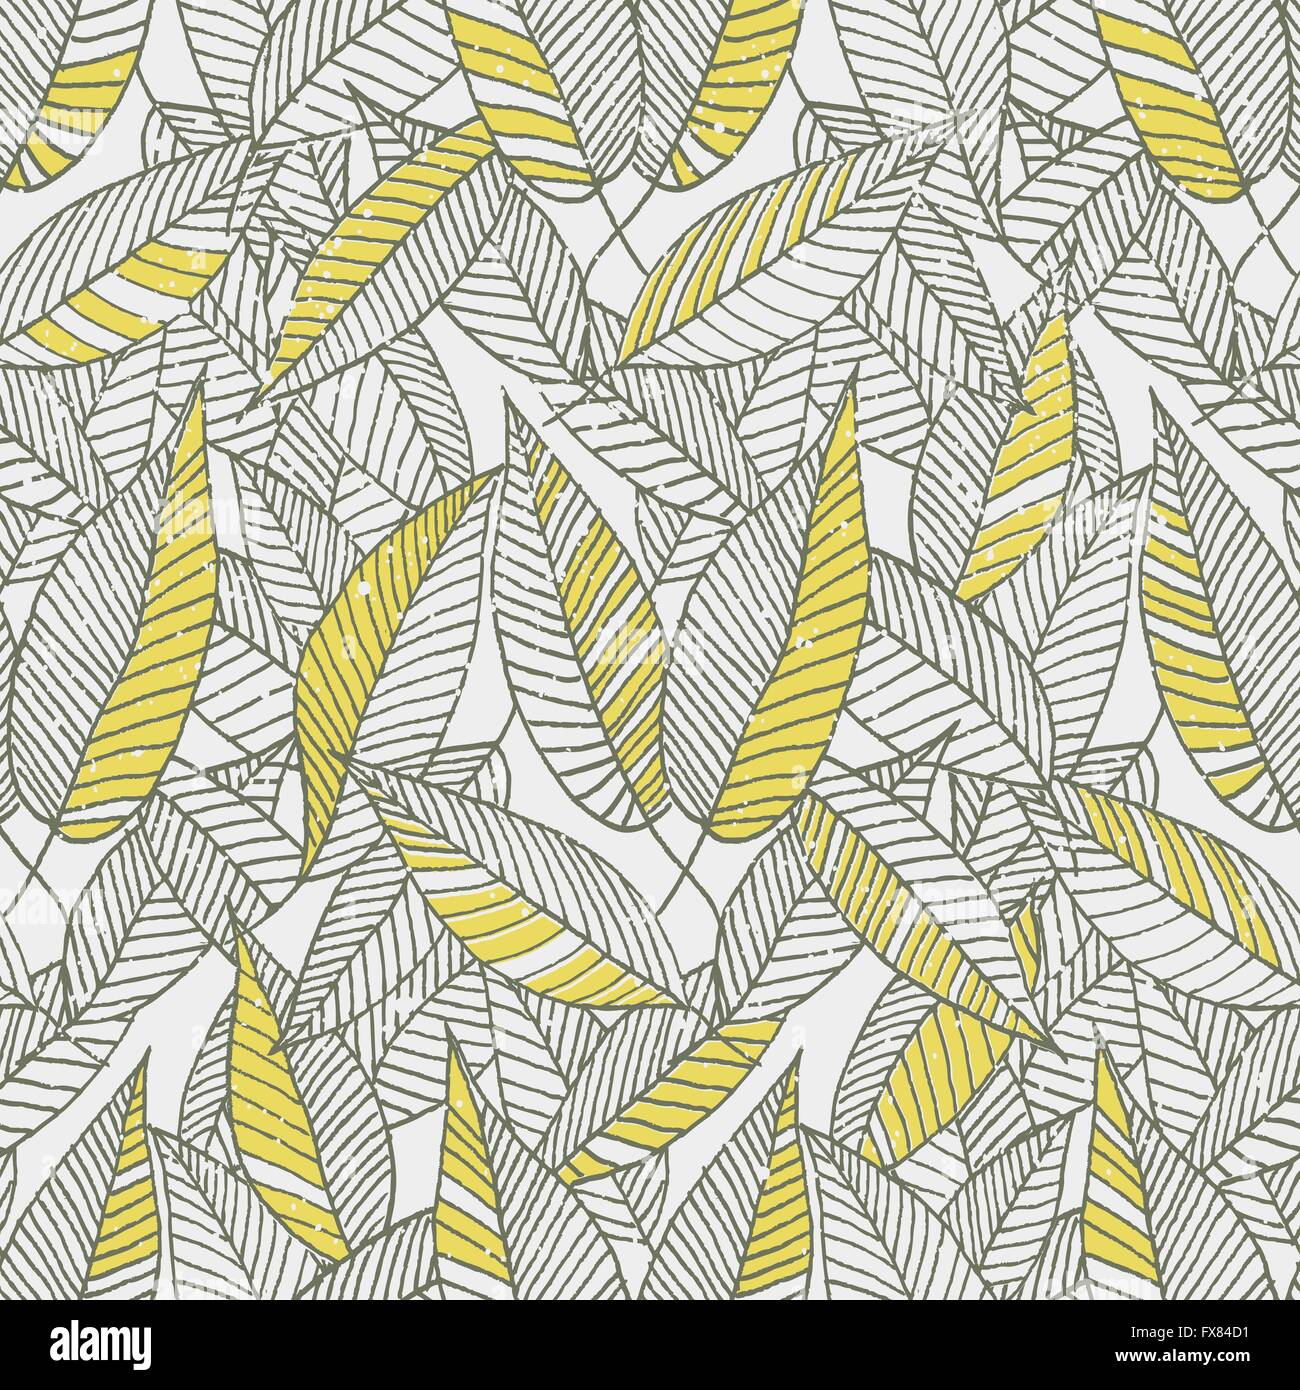 Seamless Floral Leaf Pattern. Repeating leaves pattern. Hand made Vector illustration Stock Vector